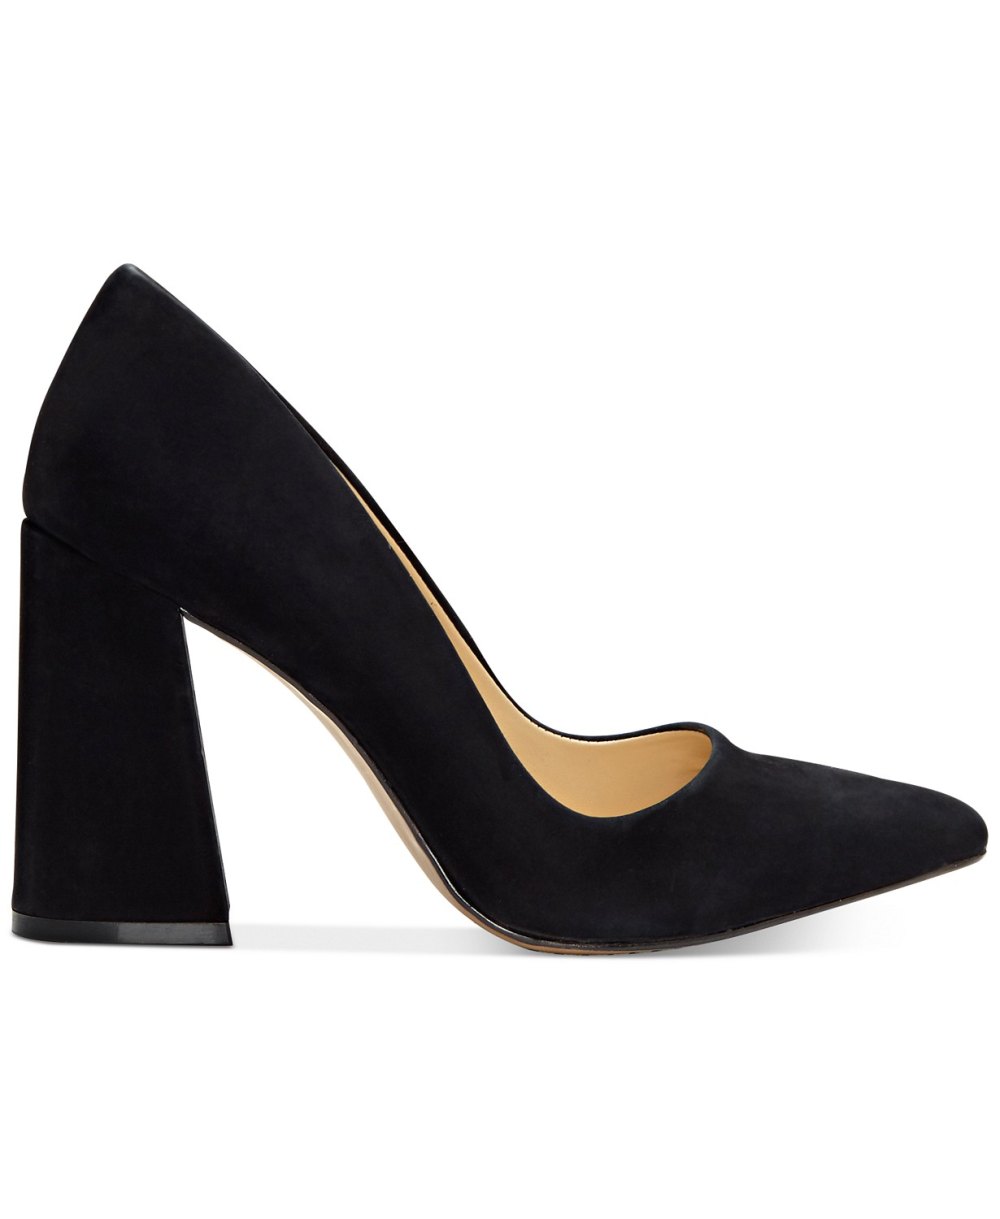 These Chic Vince Camuto Pumps Are on Sale for a Limited Time!